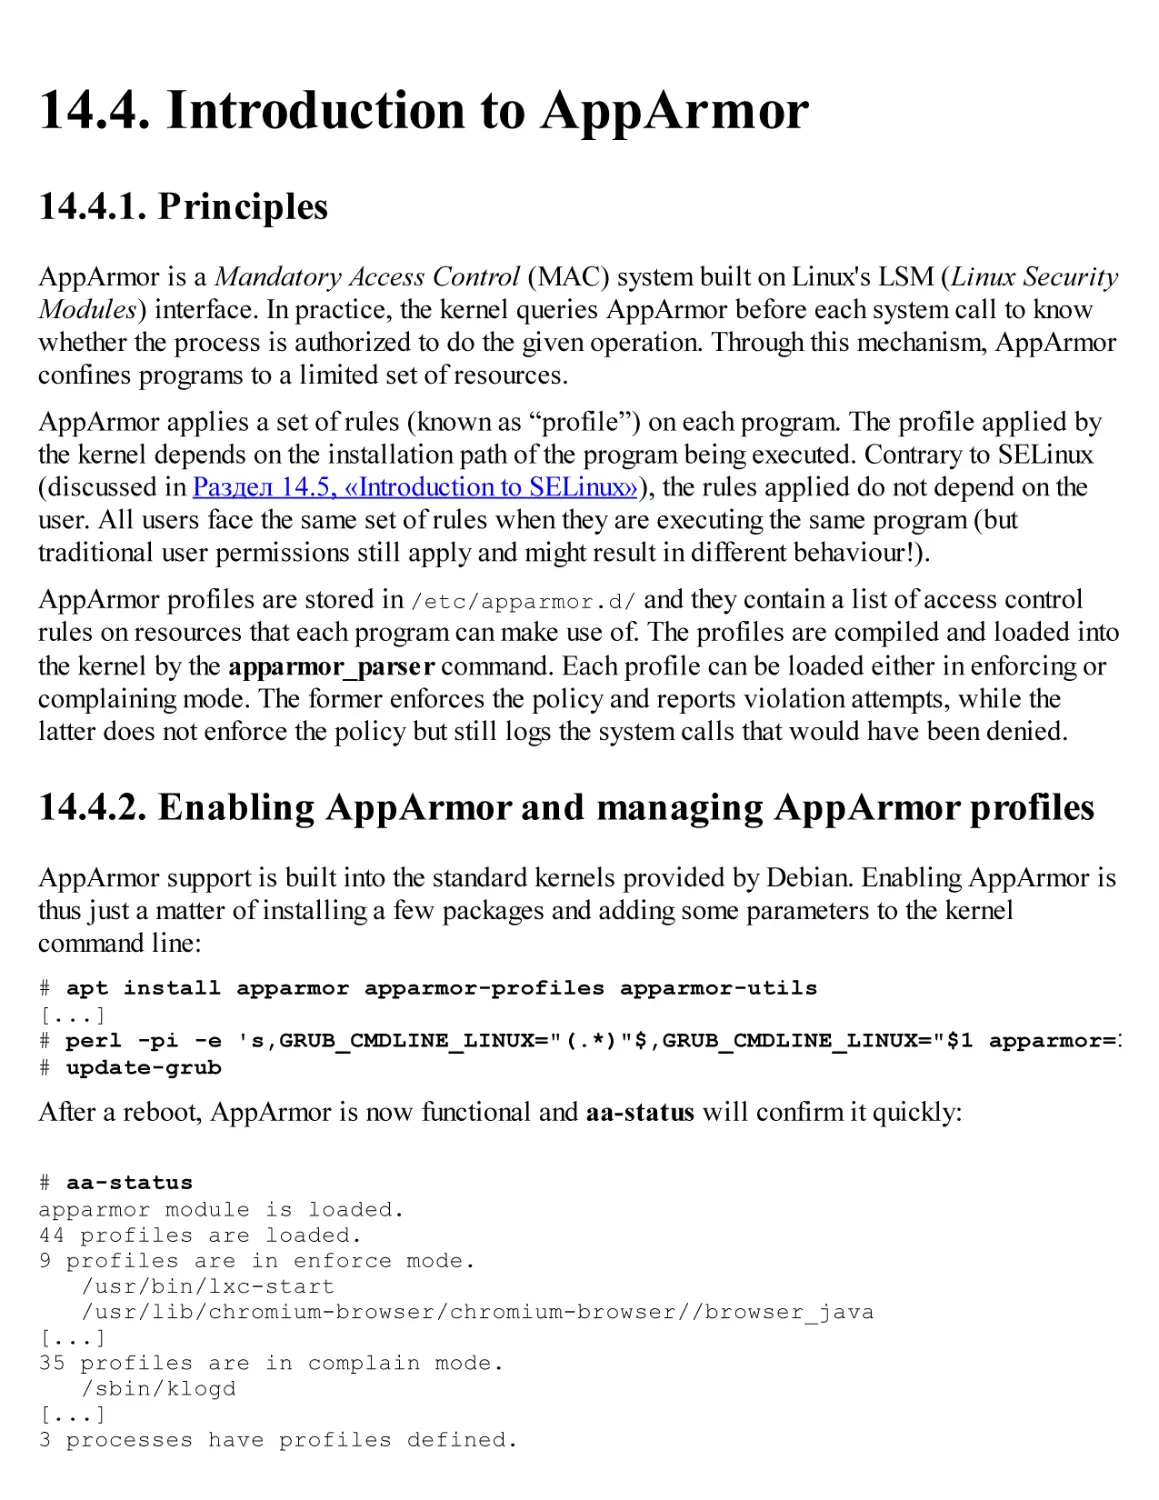 14.4. Introduction to AppArmor
14.4.1. Principles
14.4.2. Enabling AppArmor and managing AppArmor profiles